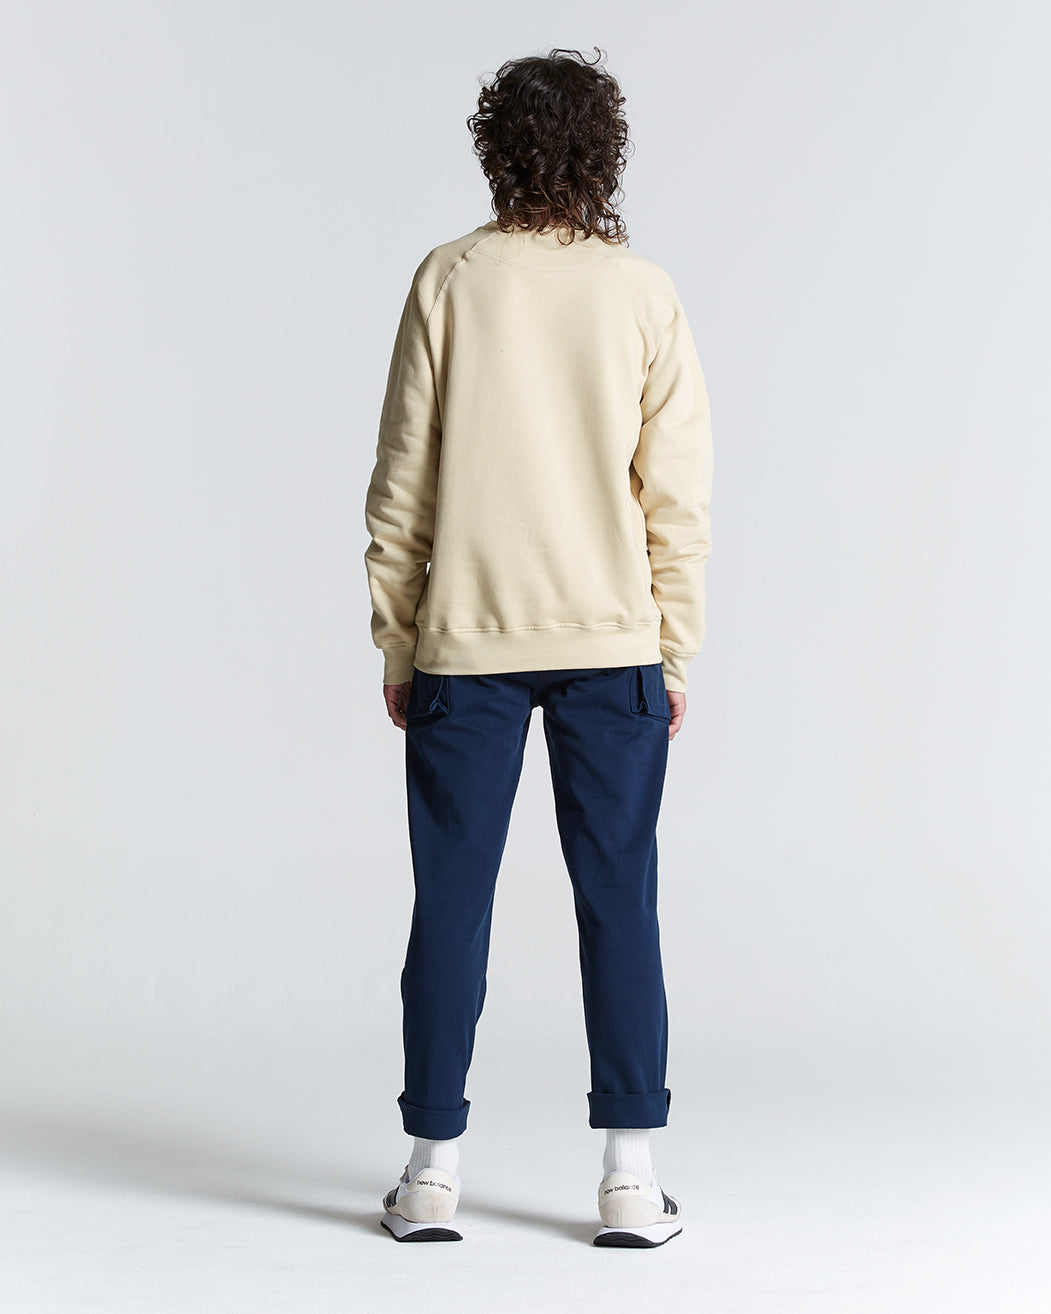 The Simple Sweater in Brown Rice